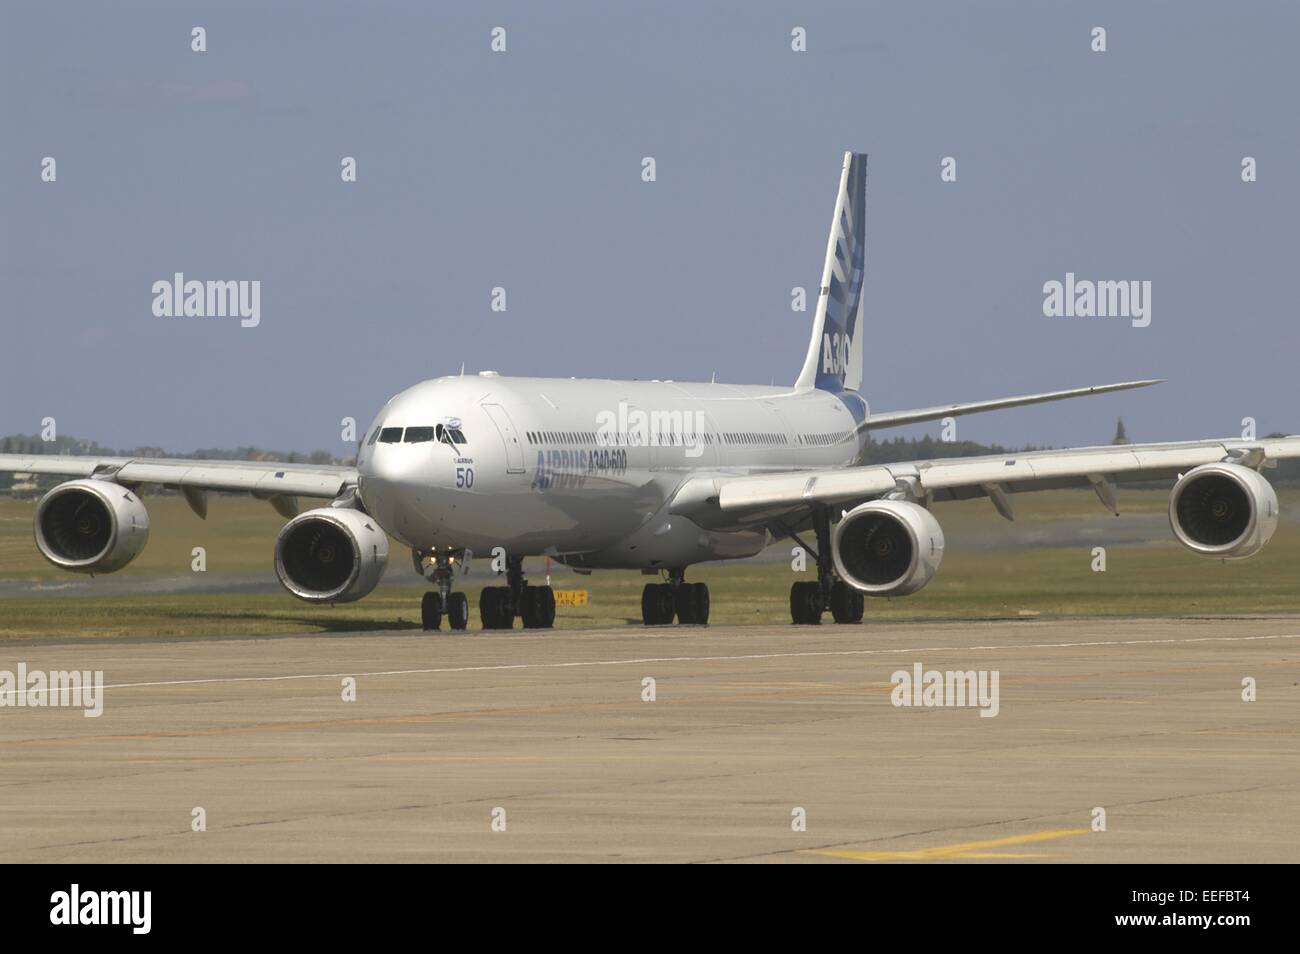 Airbus A 340 / 600 airliner Banque D'Images